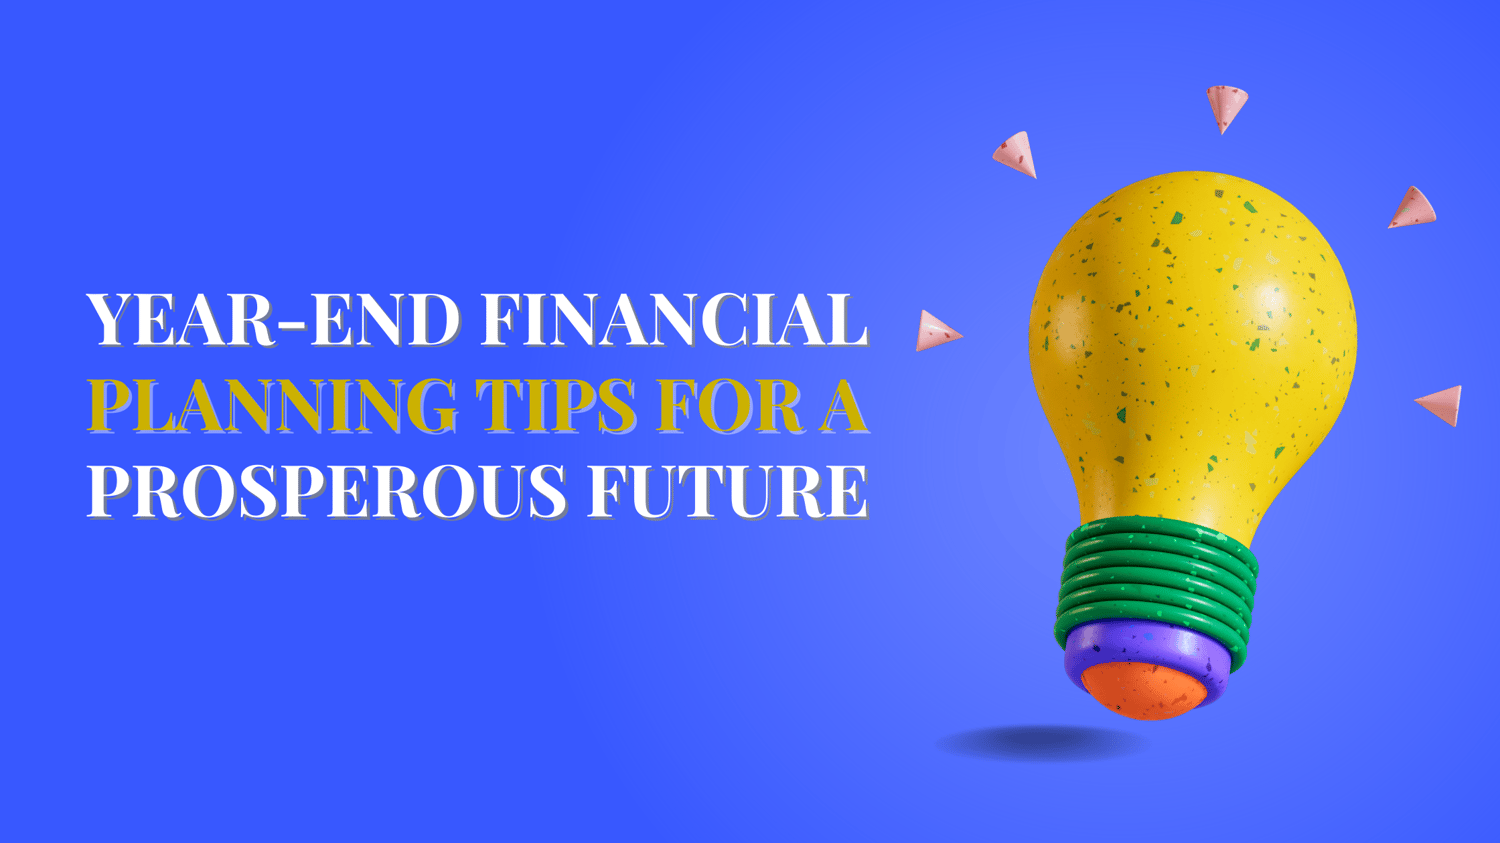 YEAR-END FINANCIAL PLANNING TIPS FOR A PROSPEROUS FUTURE